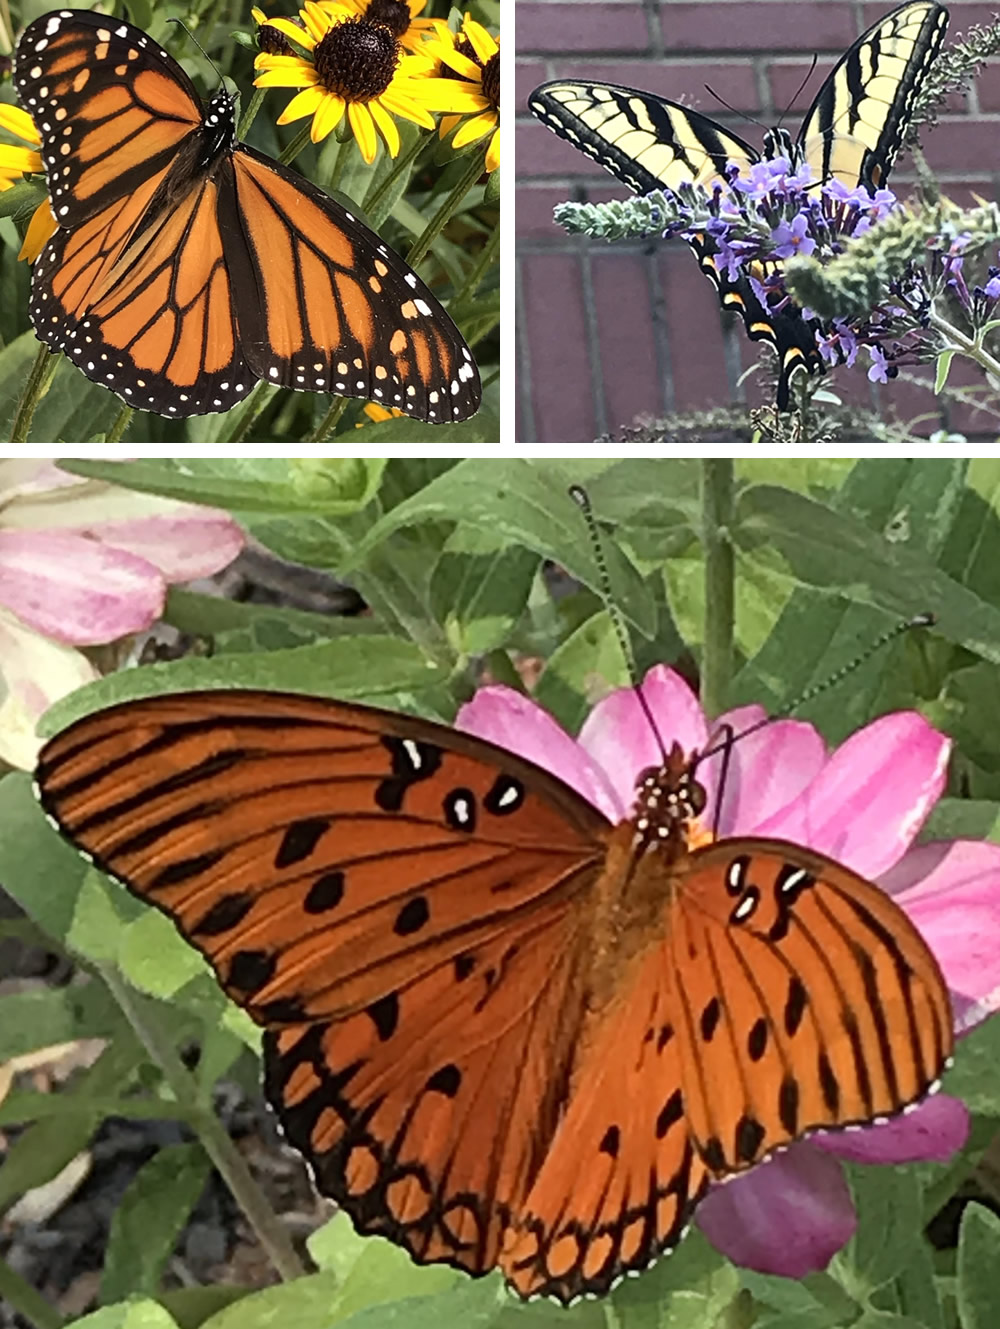 Photos from the butterfly garden at Welch Elementary School, Newnan, Georgia